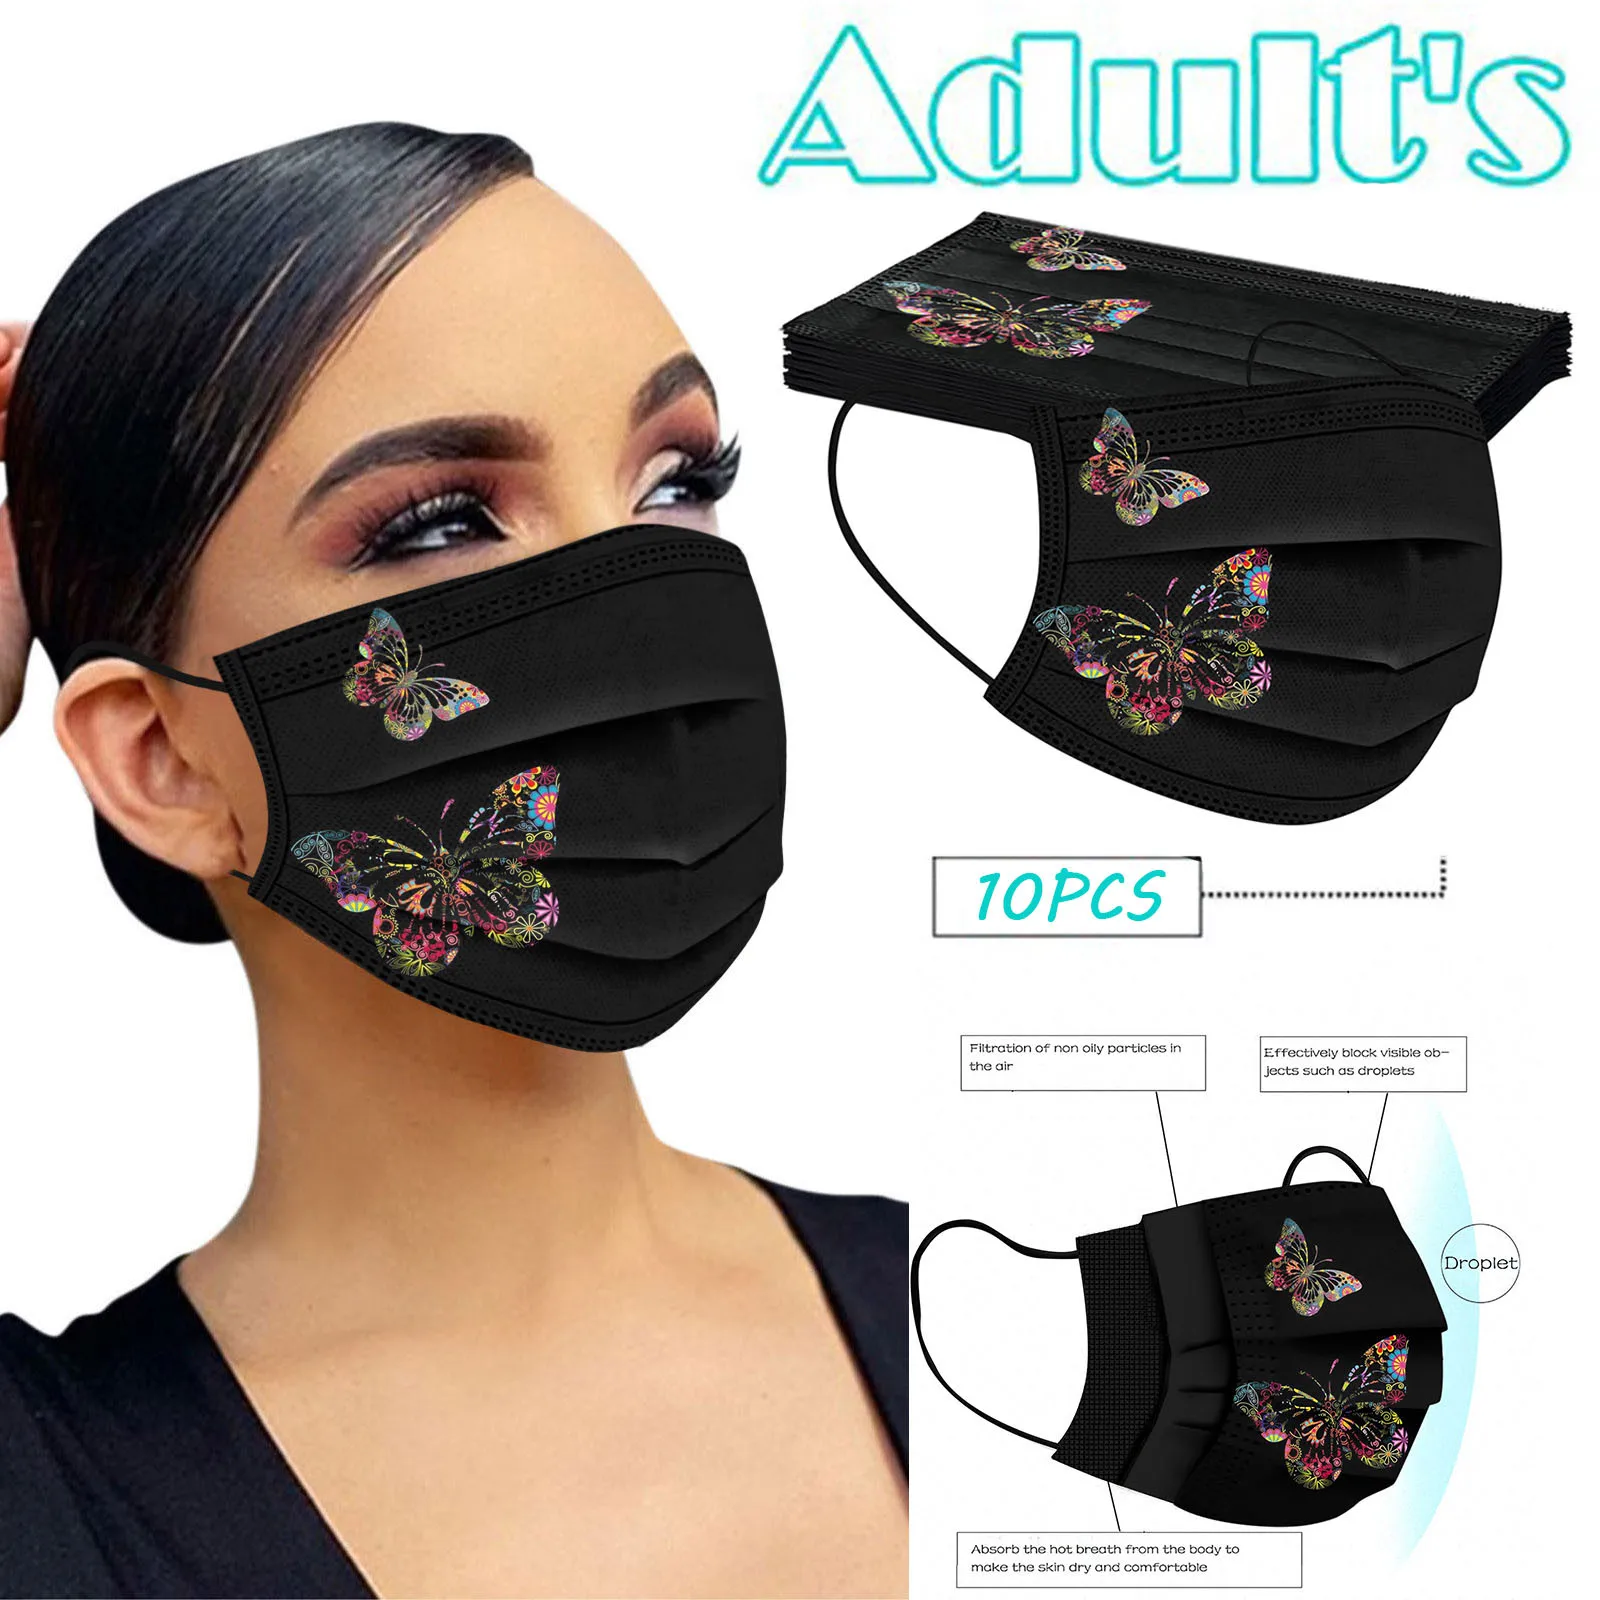 

10PCS Disposable Face Mascarillas Anties-Dust Face Mask Filter Earloop Activated Carbon Black Non-woven 3ply Mouth Mask маска